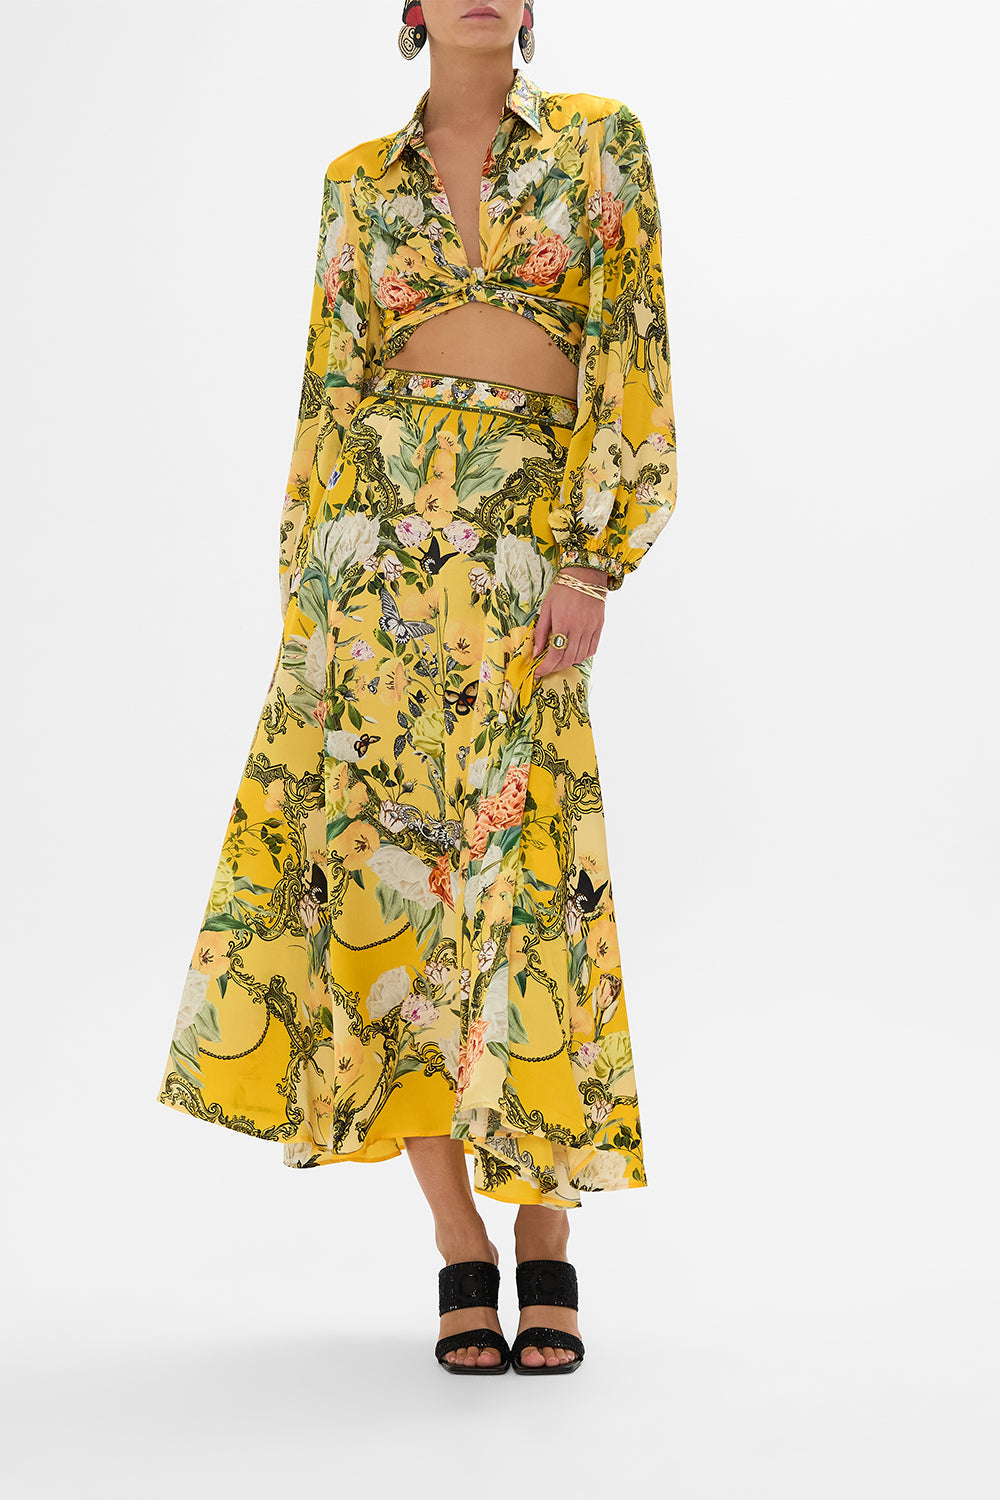 CAMILLA yellow floral panel flared maxi skirt in Paths Of Gold print